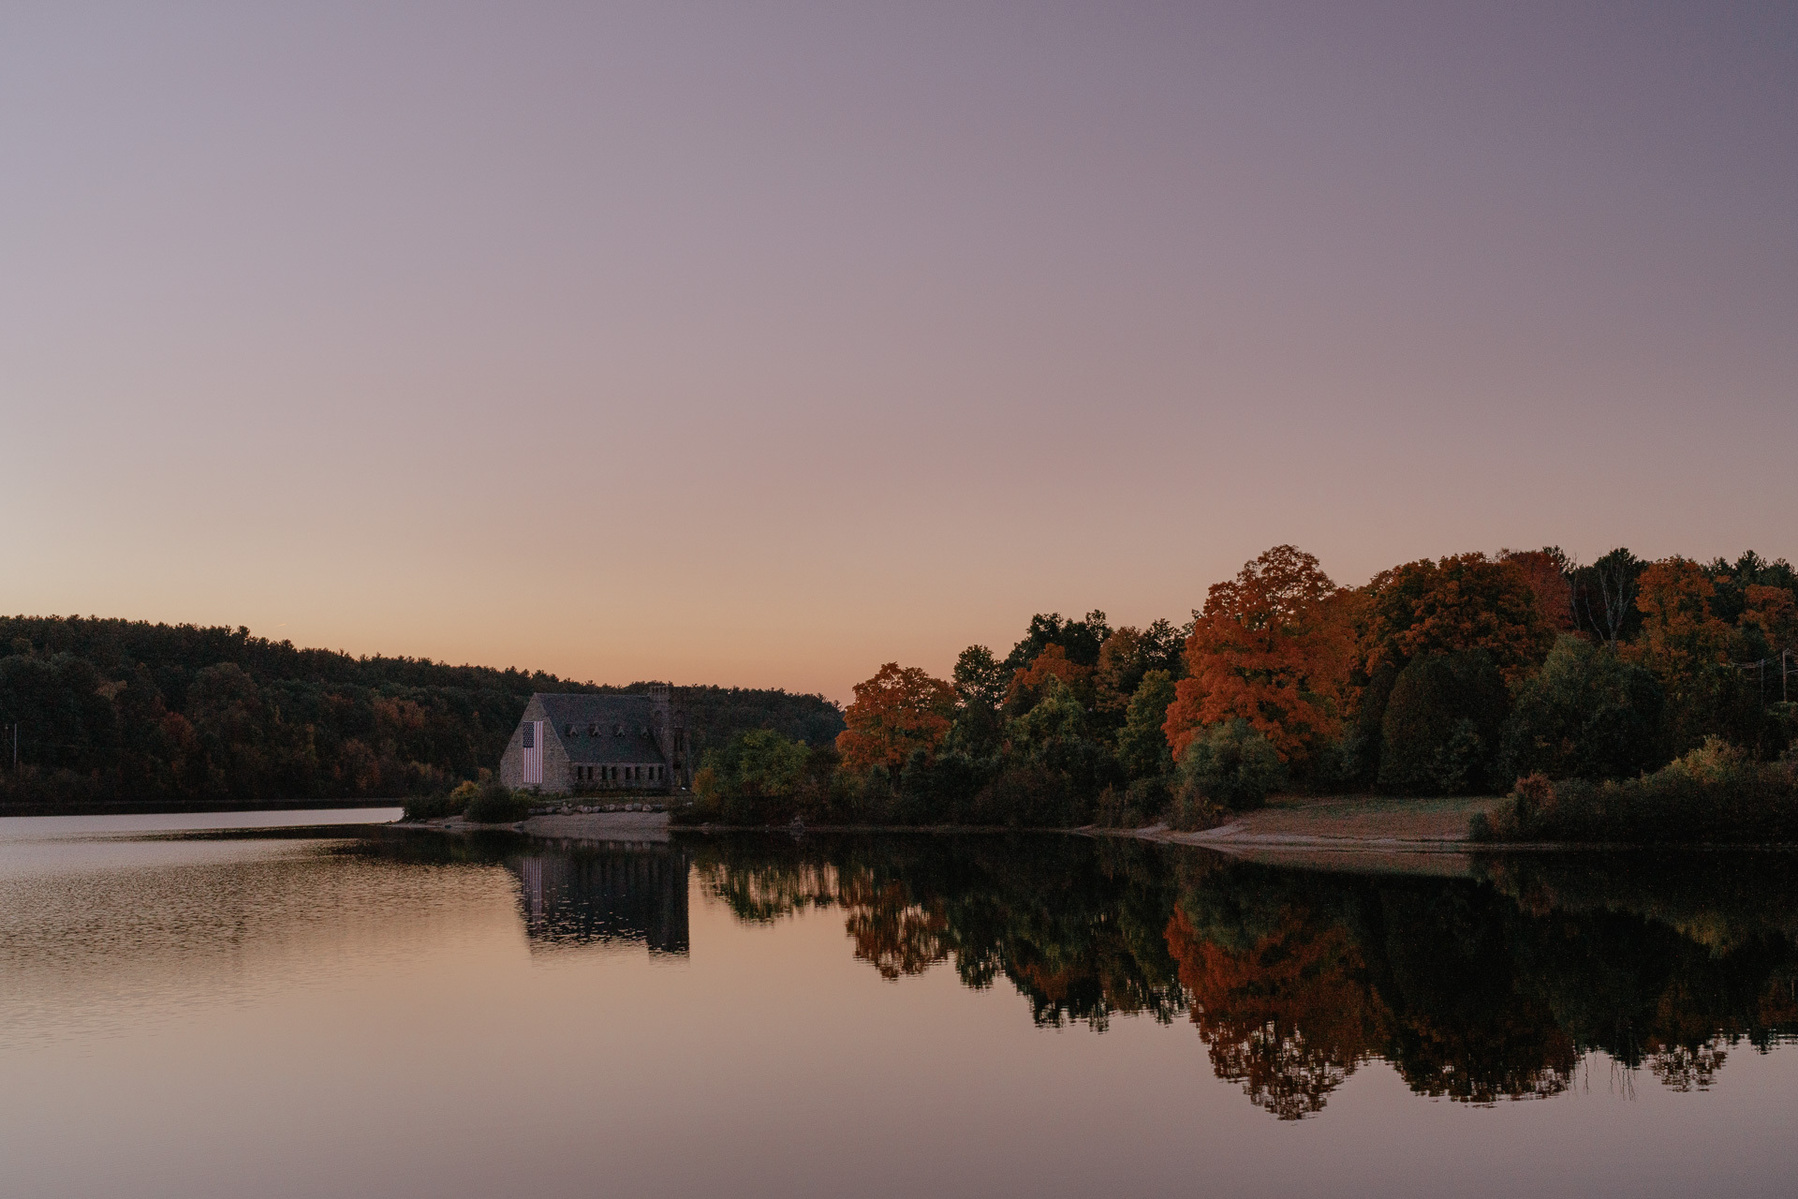 Old Stone Church in West Boylston, MA, reflecting in lake during sunset with fall foliage.